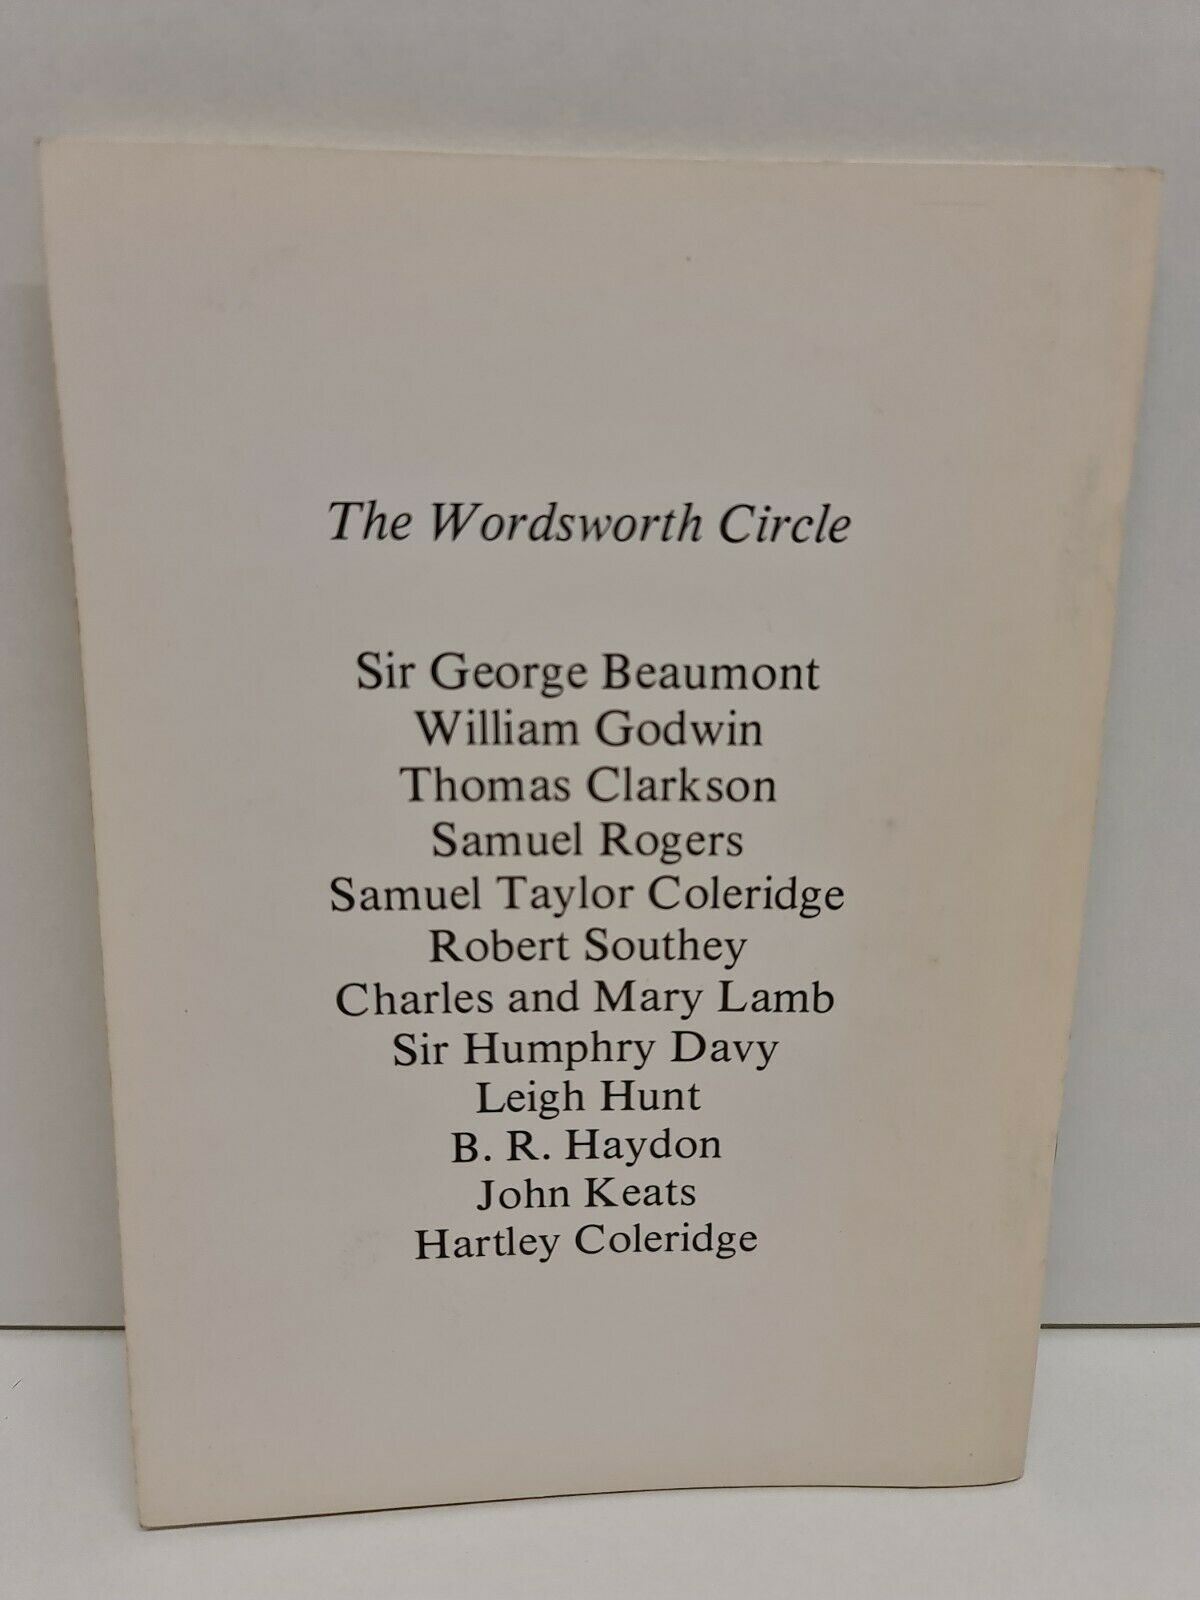 The Wordsworth Circle by Robert Woof